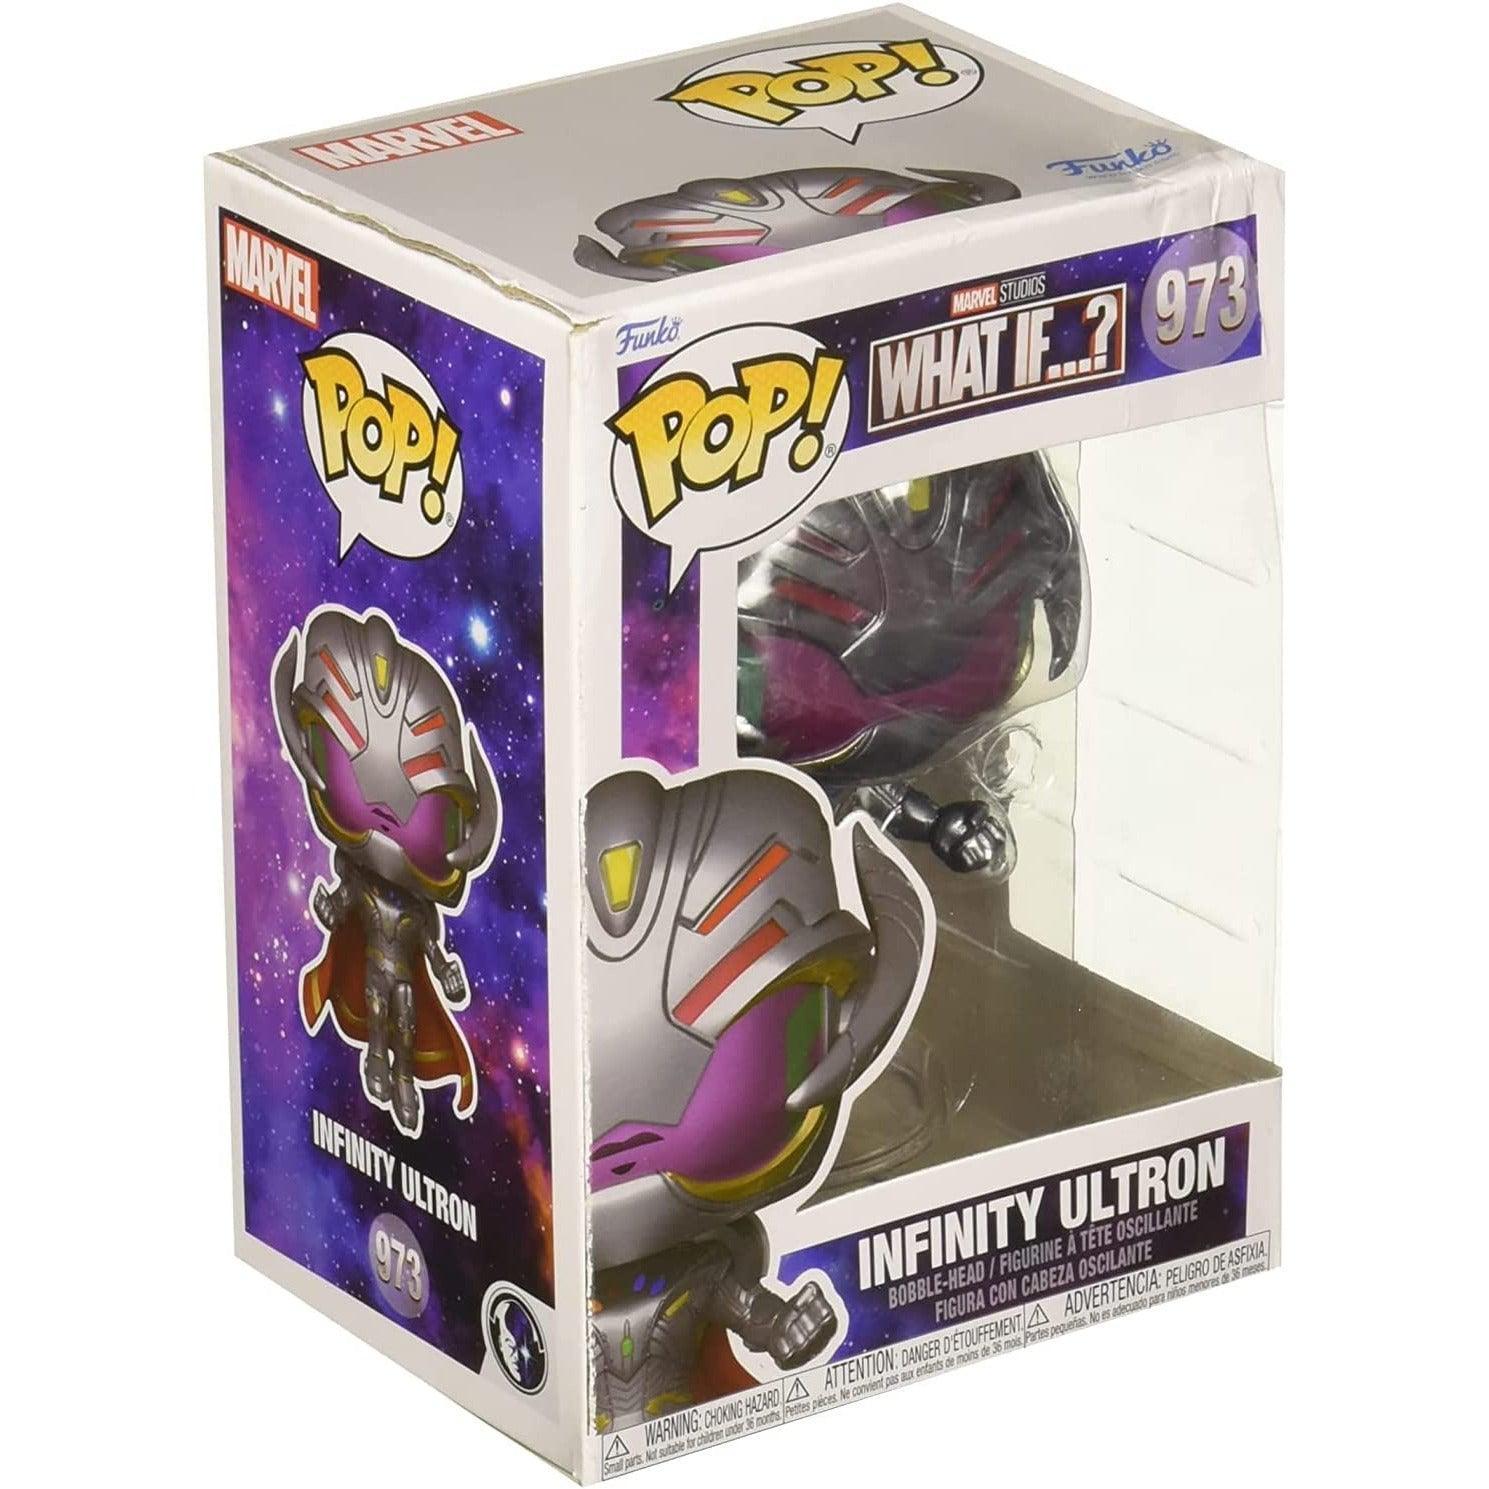 Funko Pop Marvel: What If? - Infinity Ultron - BumbleToys - 18+, 4+ Years, 5-7 Years, Action Figures, Boys, Characters, Funko, Marvel, Pre-Order